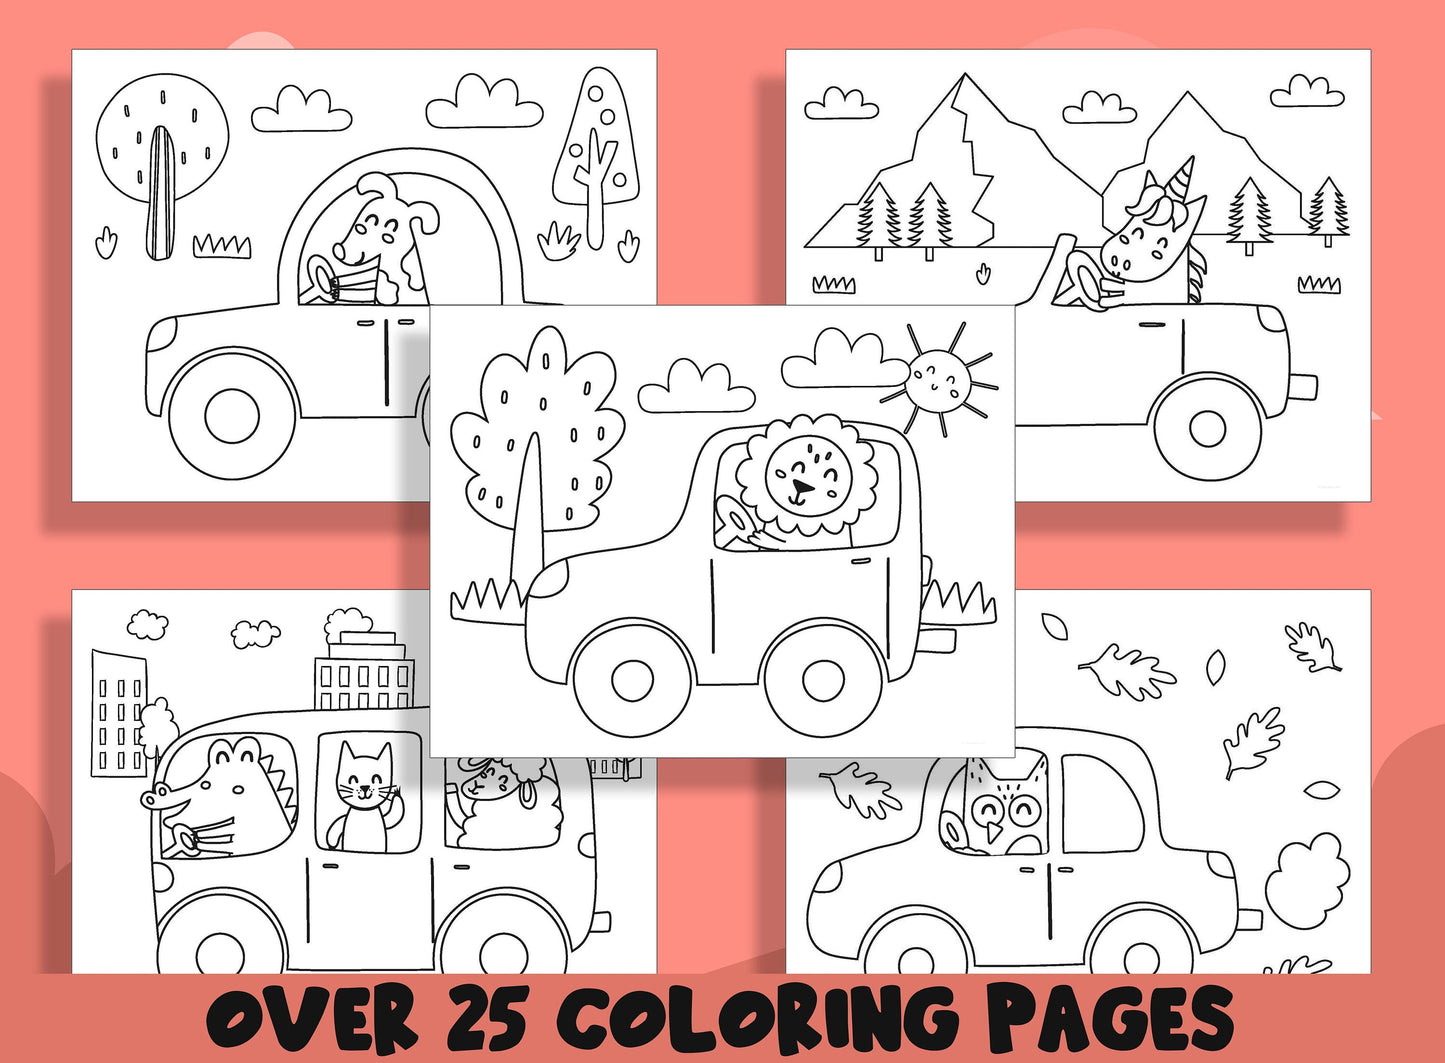 Car Coloring Pages, 25 Printable Cute Car Coloring Pages for Preschool, PreK and Kindergarten Children,  Instant PDF Download